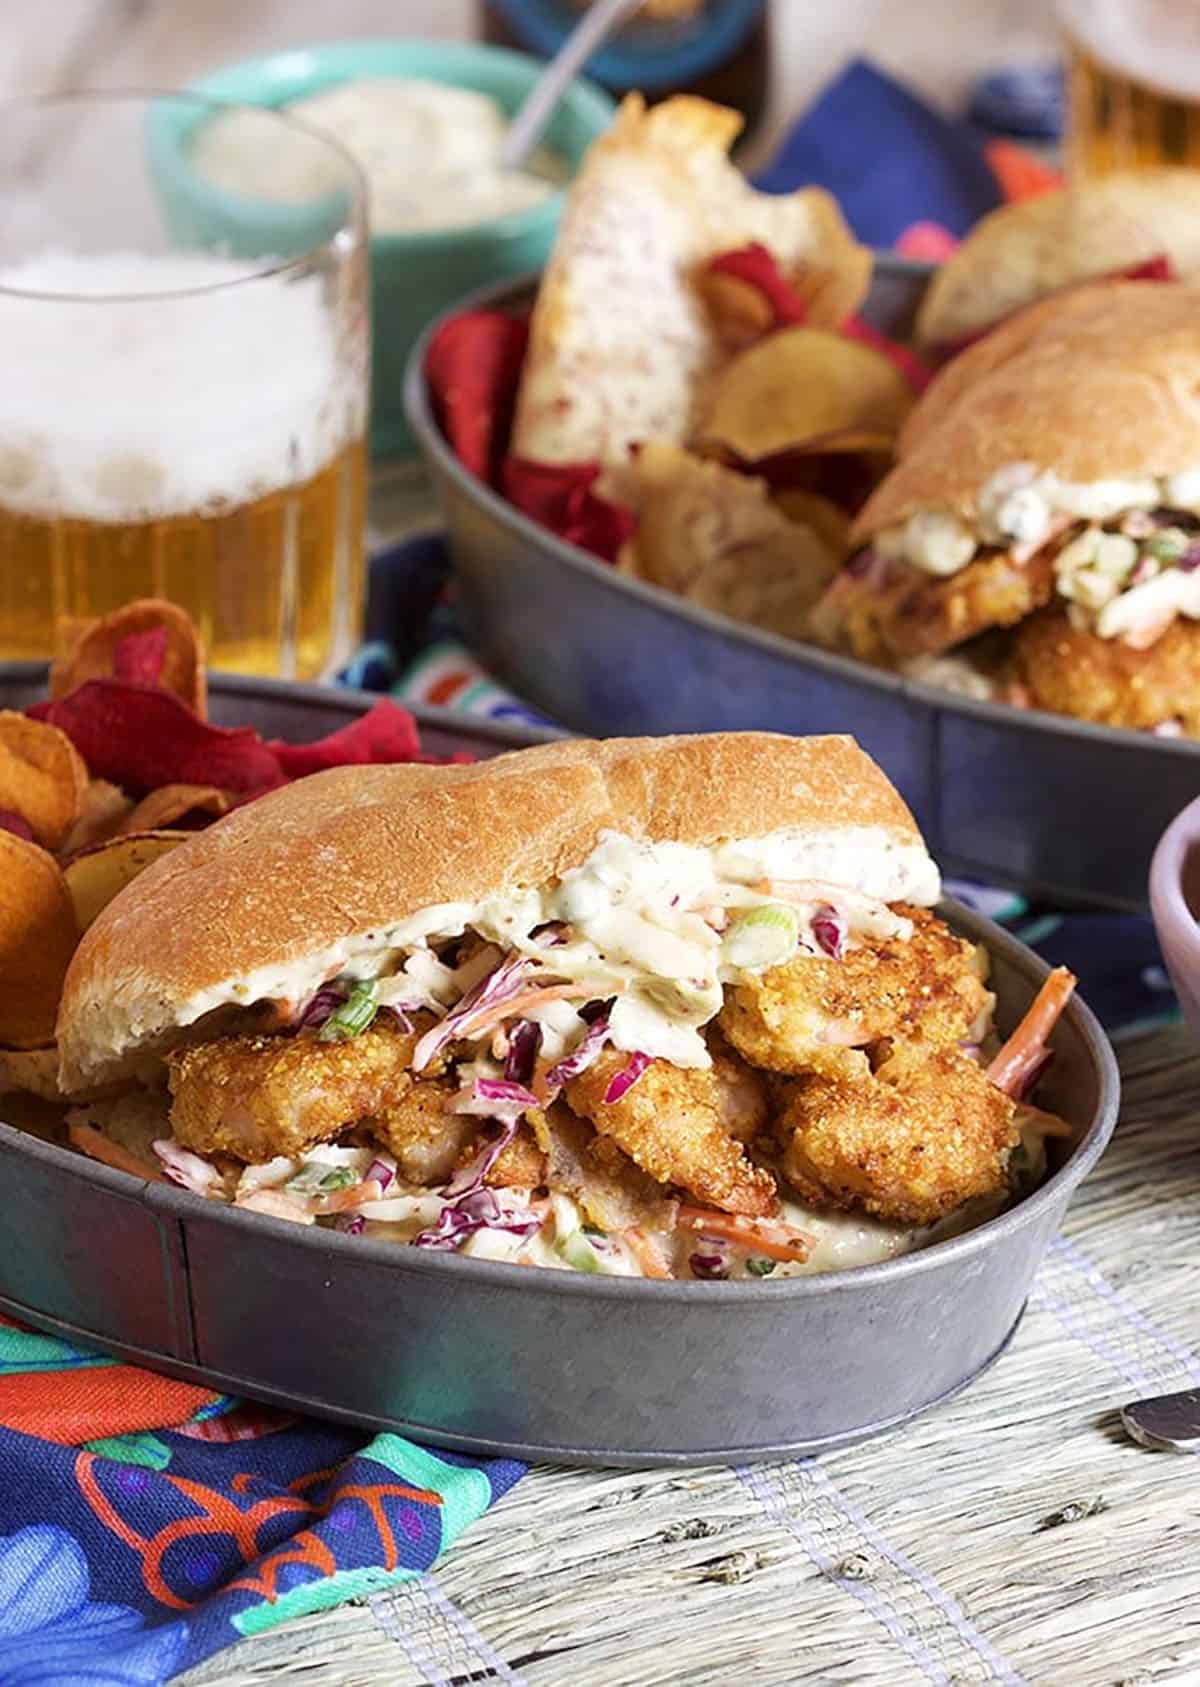 Shrimp Po Boy Sandwich in a steal tray with a glass of beer in the background.